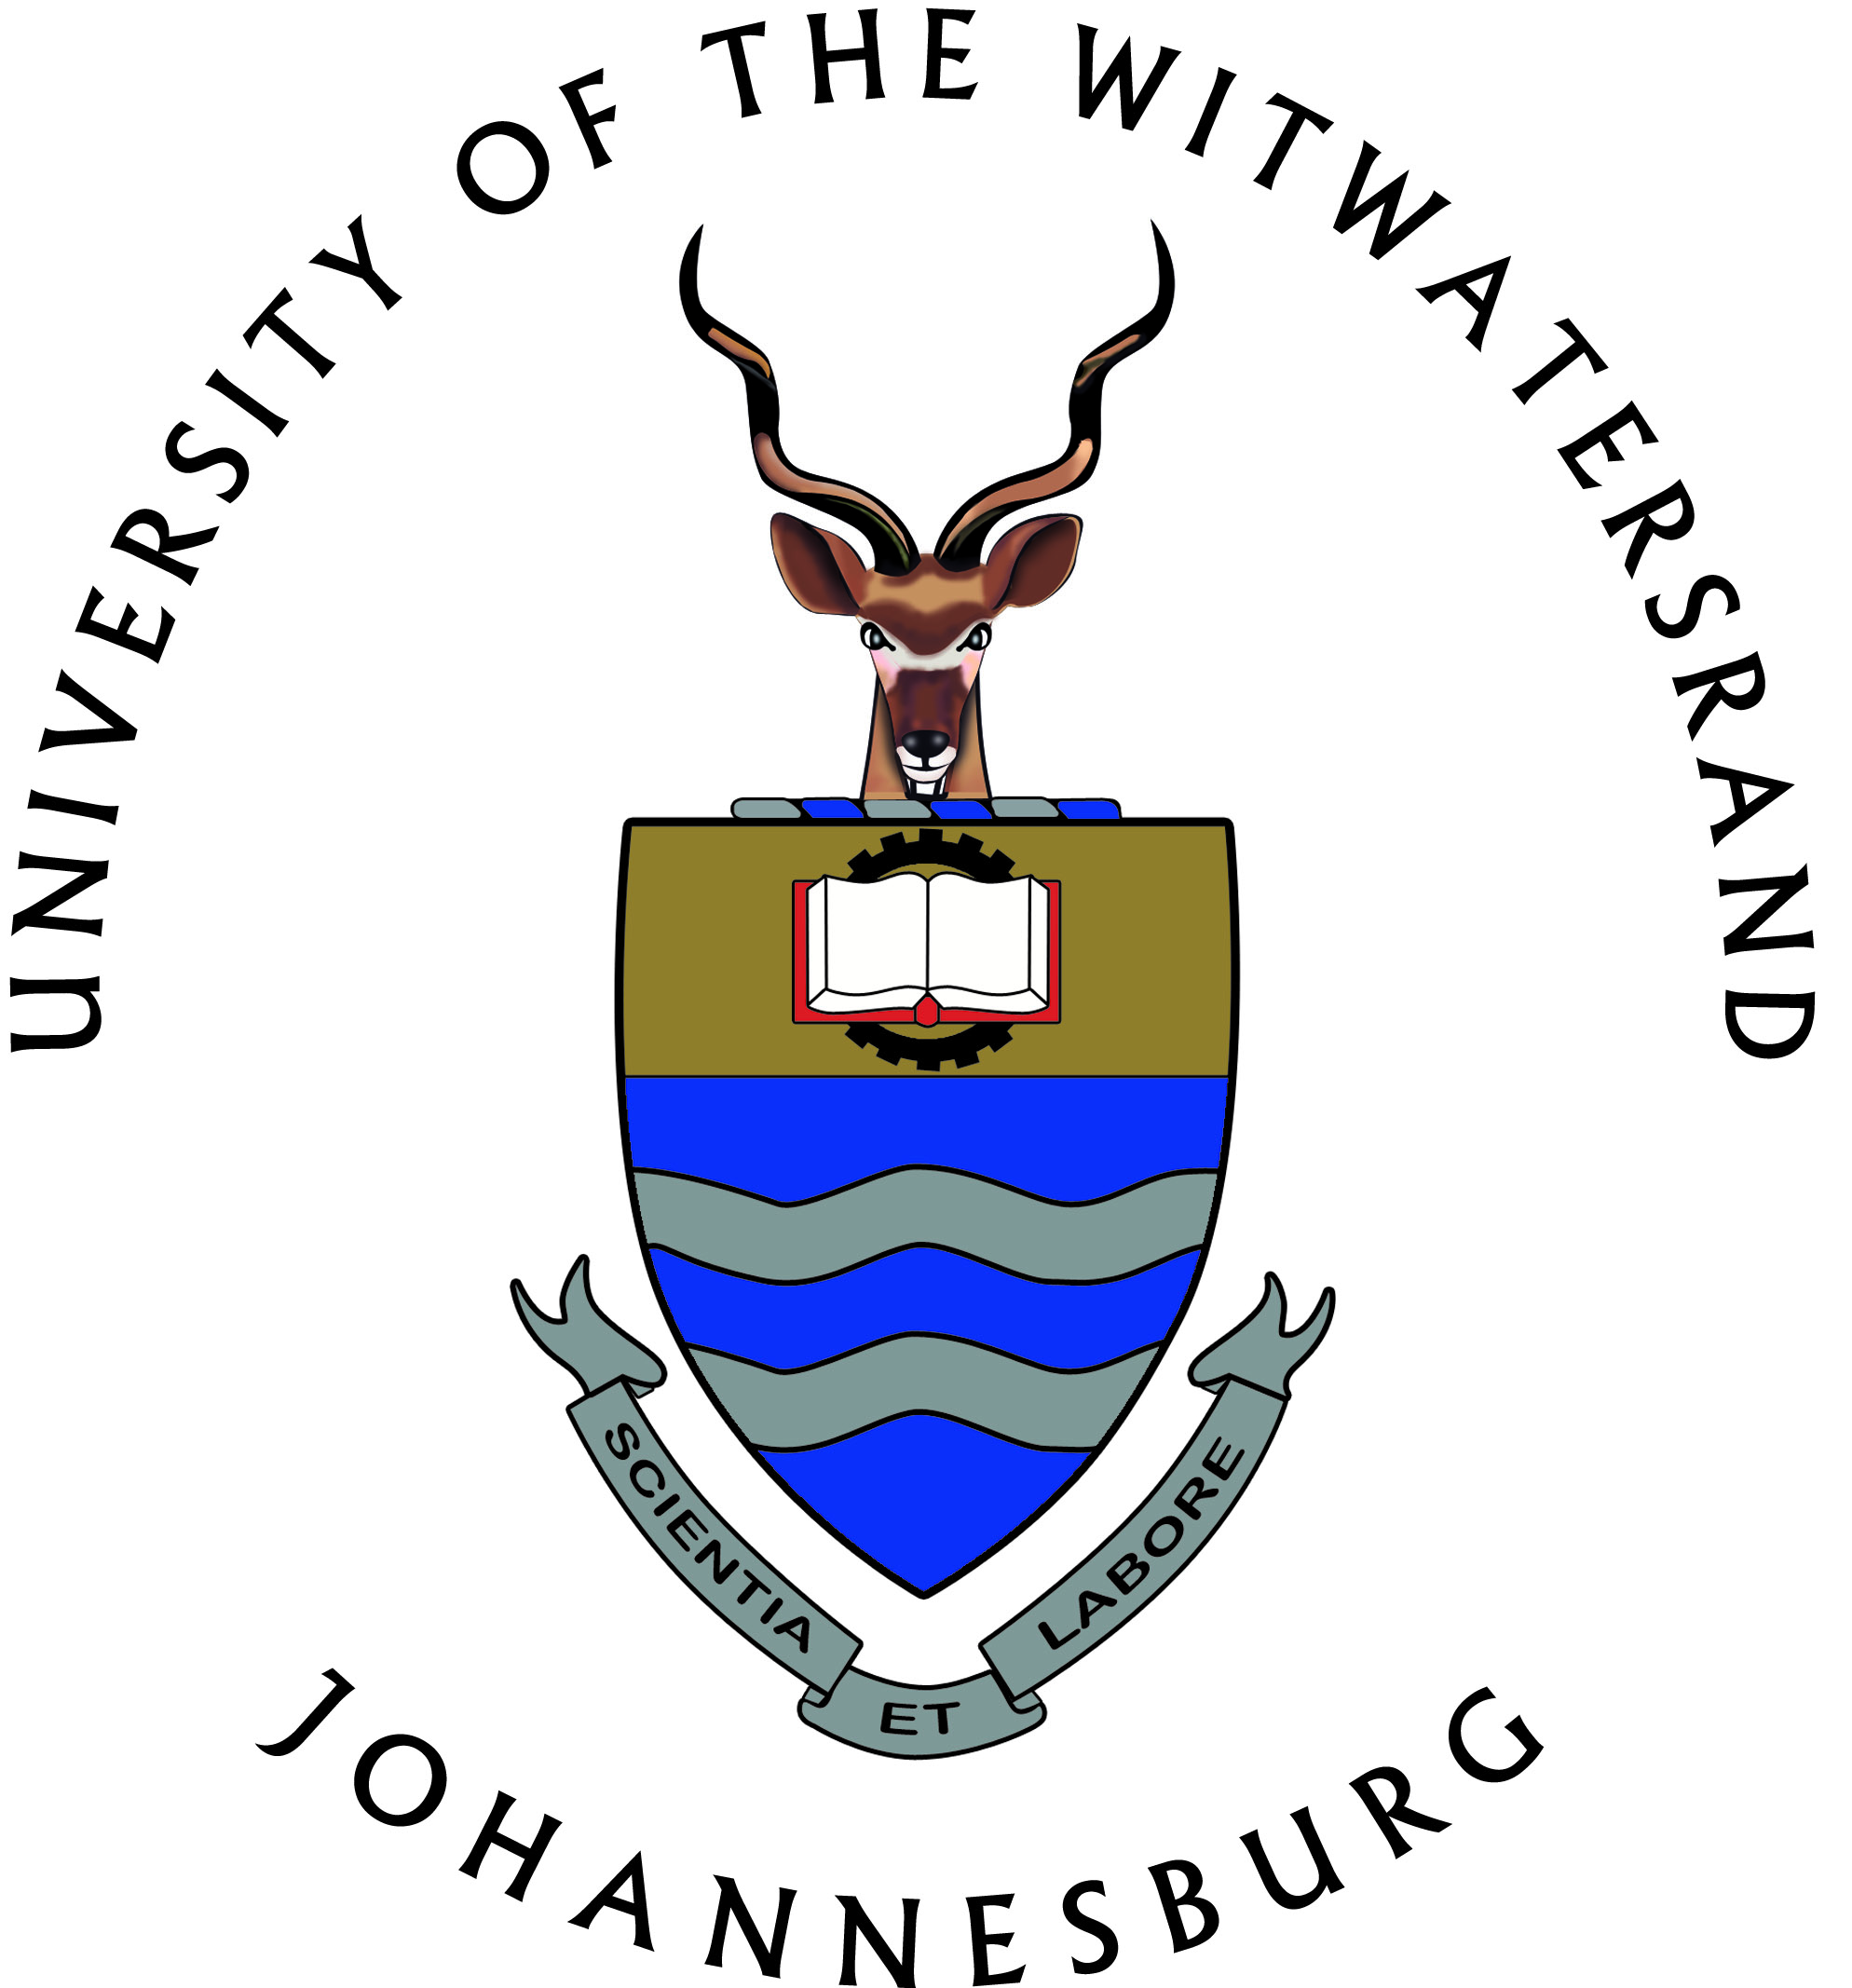 WITS-South Africa logo.png